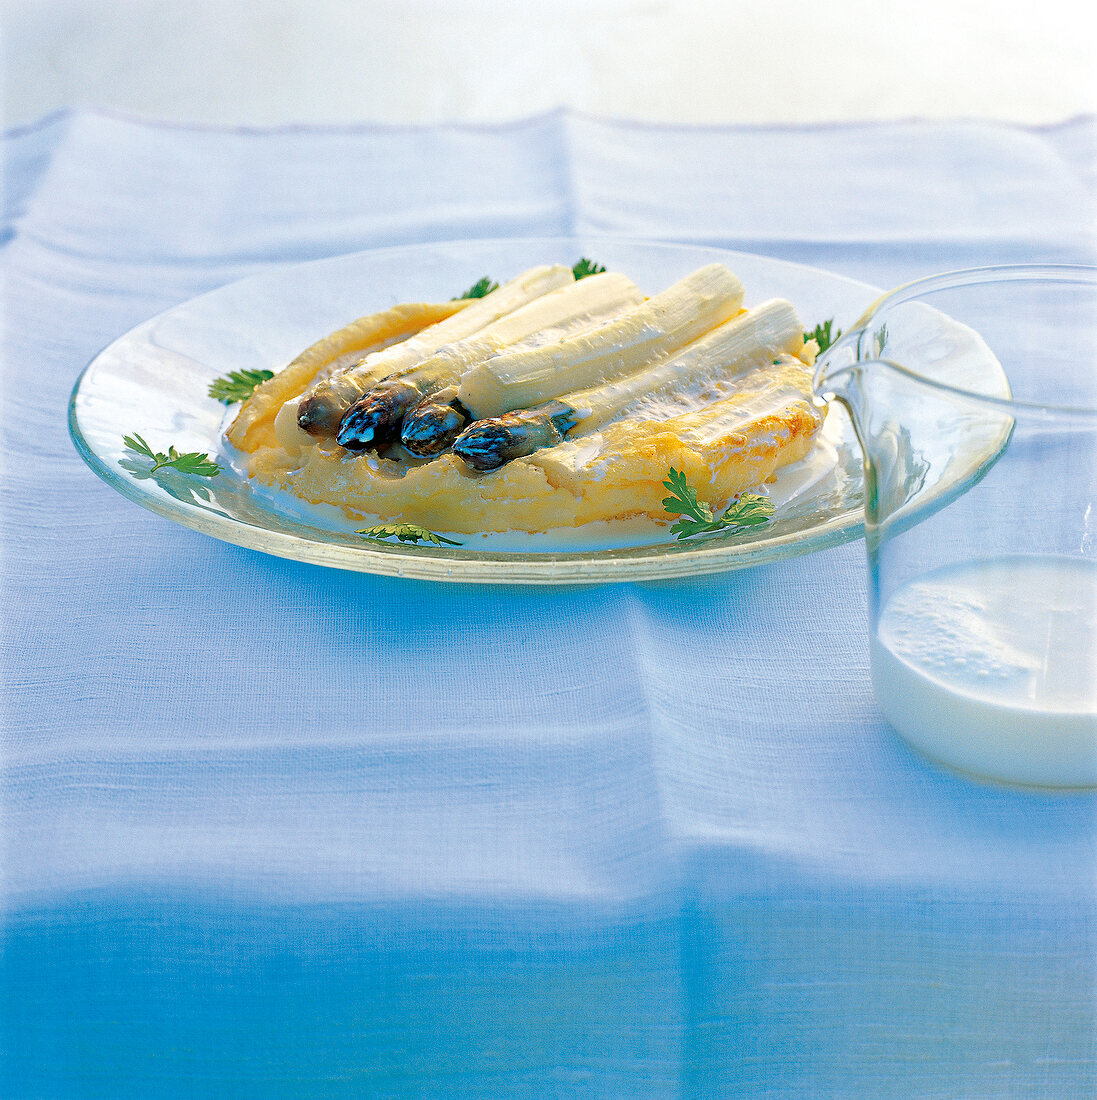 Asparagus clafoutis batter with cream sauce on plate